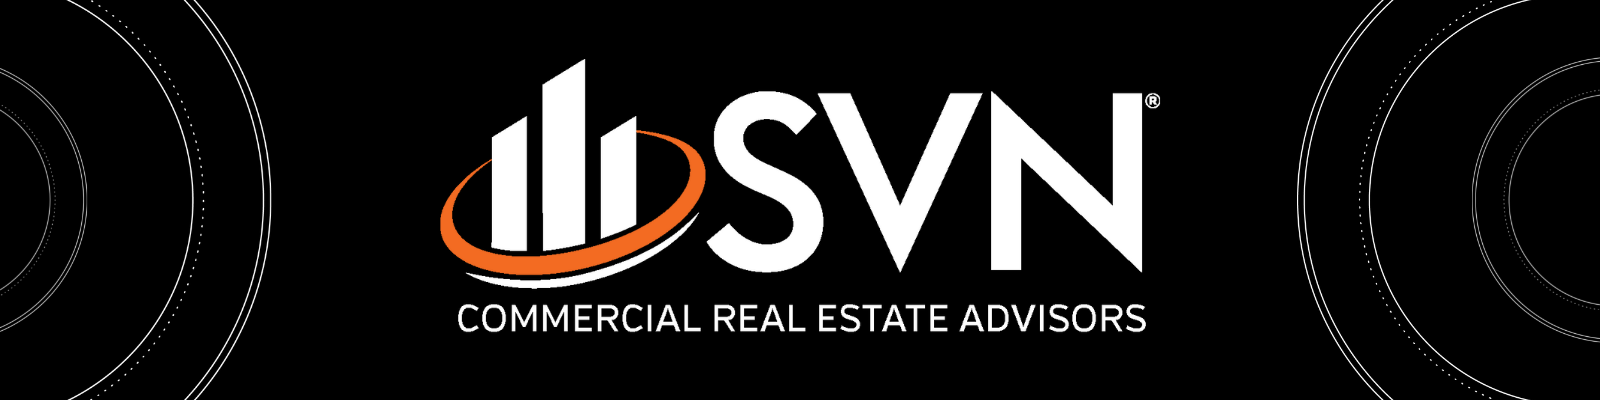  SVN® Expands Presence In Minnesota With the Addition of SVN | GC Real Estate 